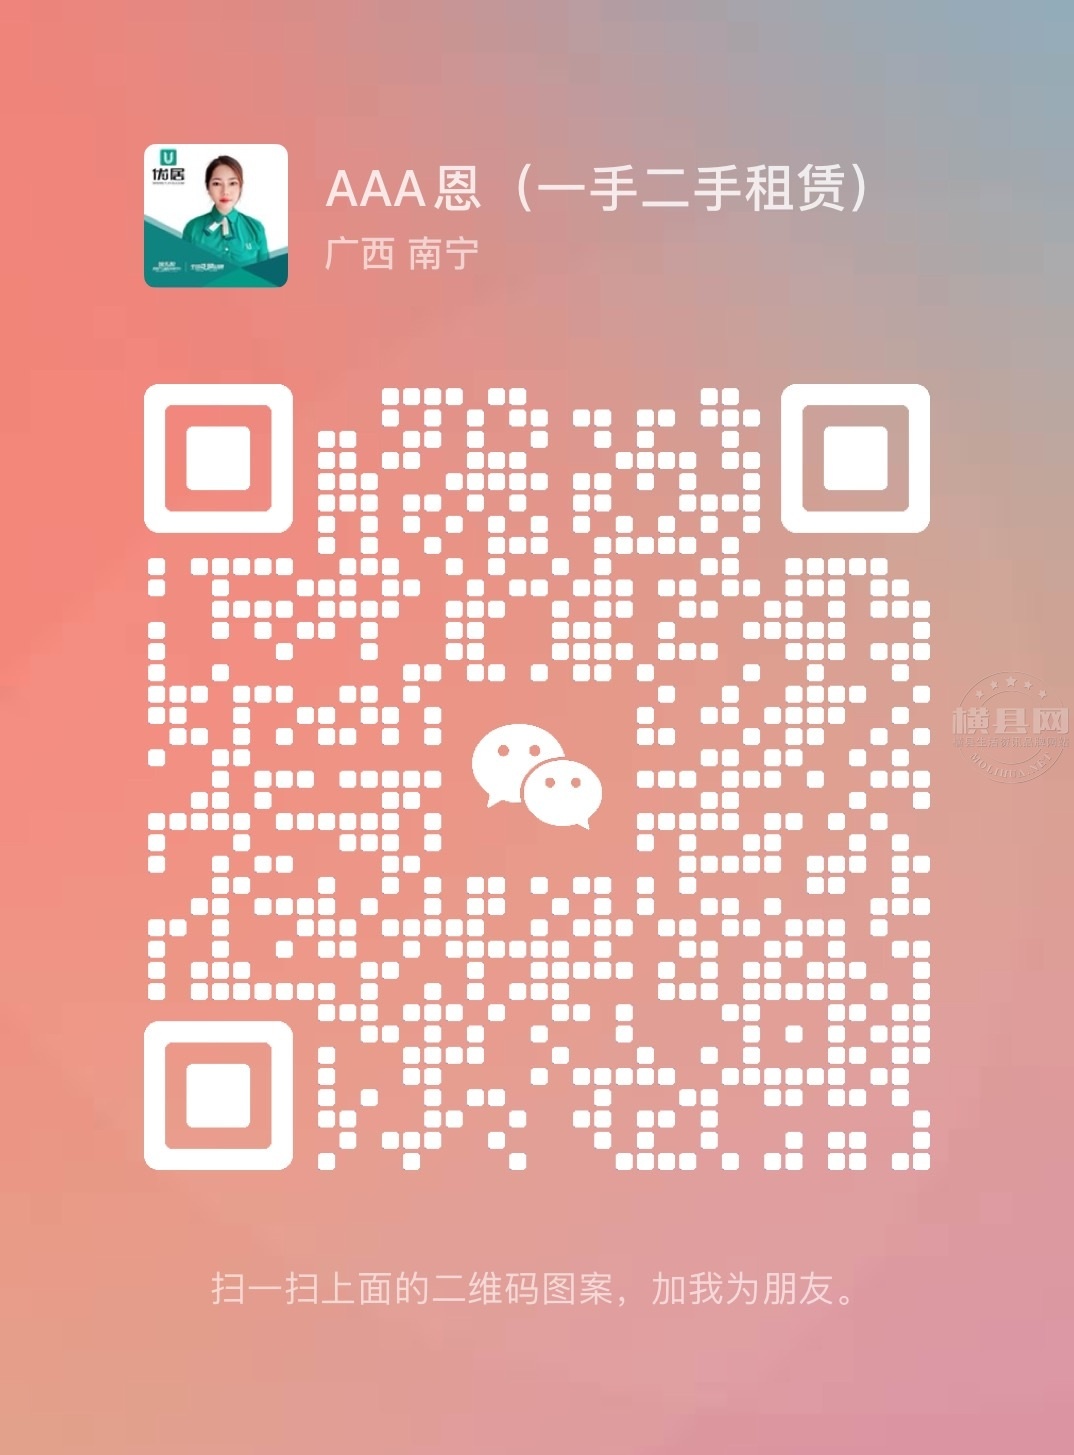 wechat_upload17158467806645be7cd28a2